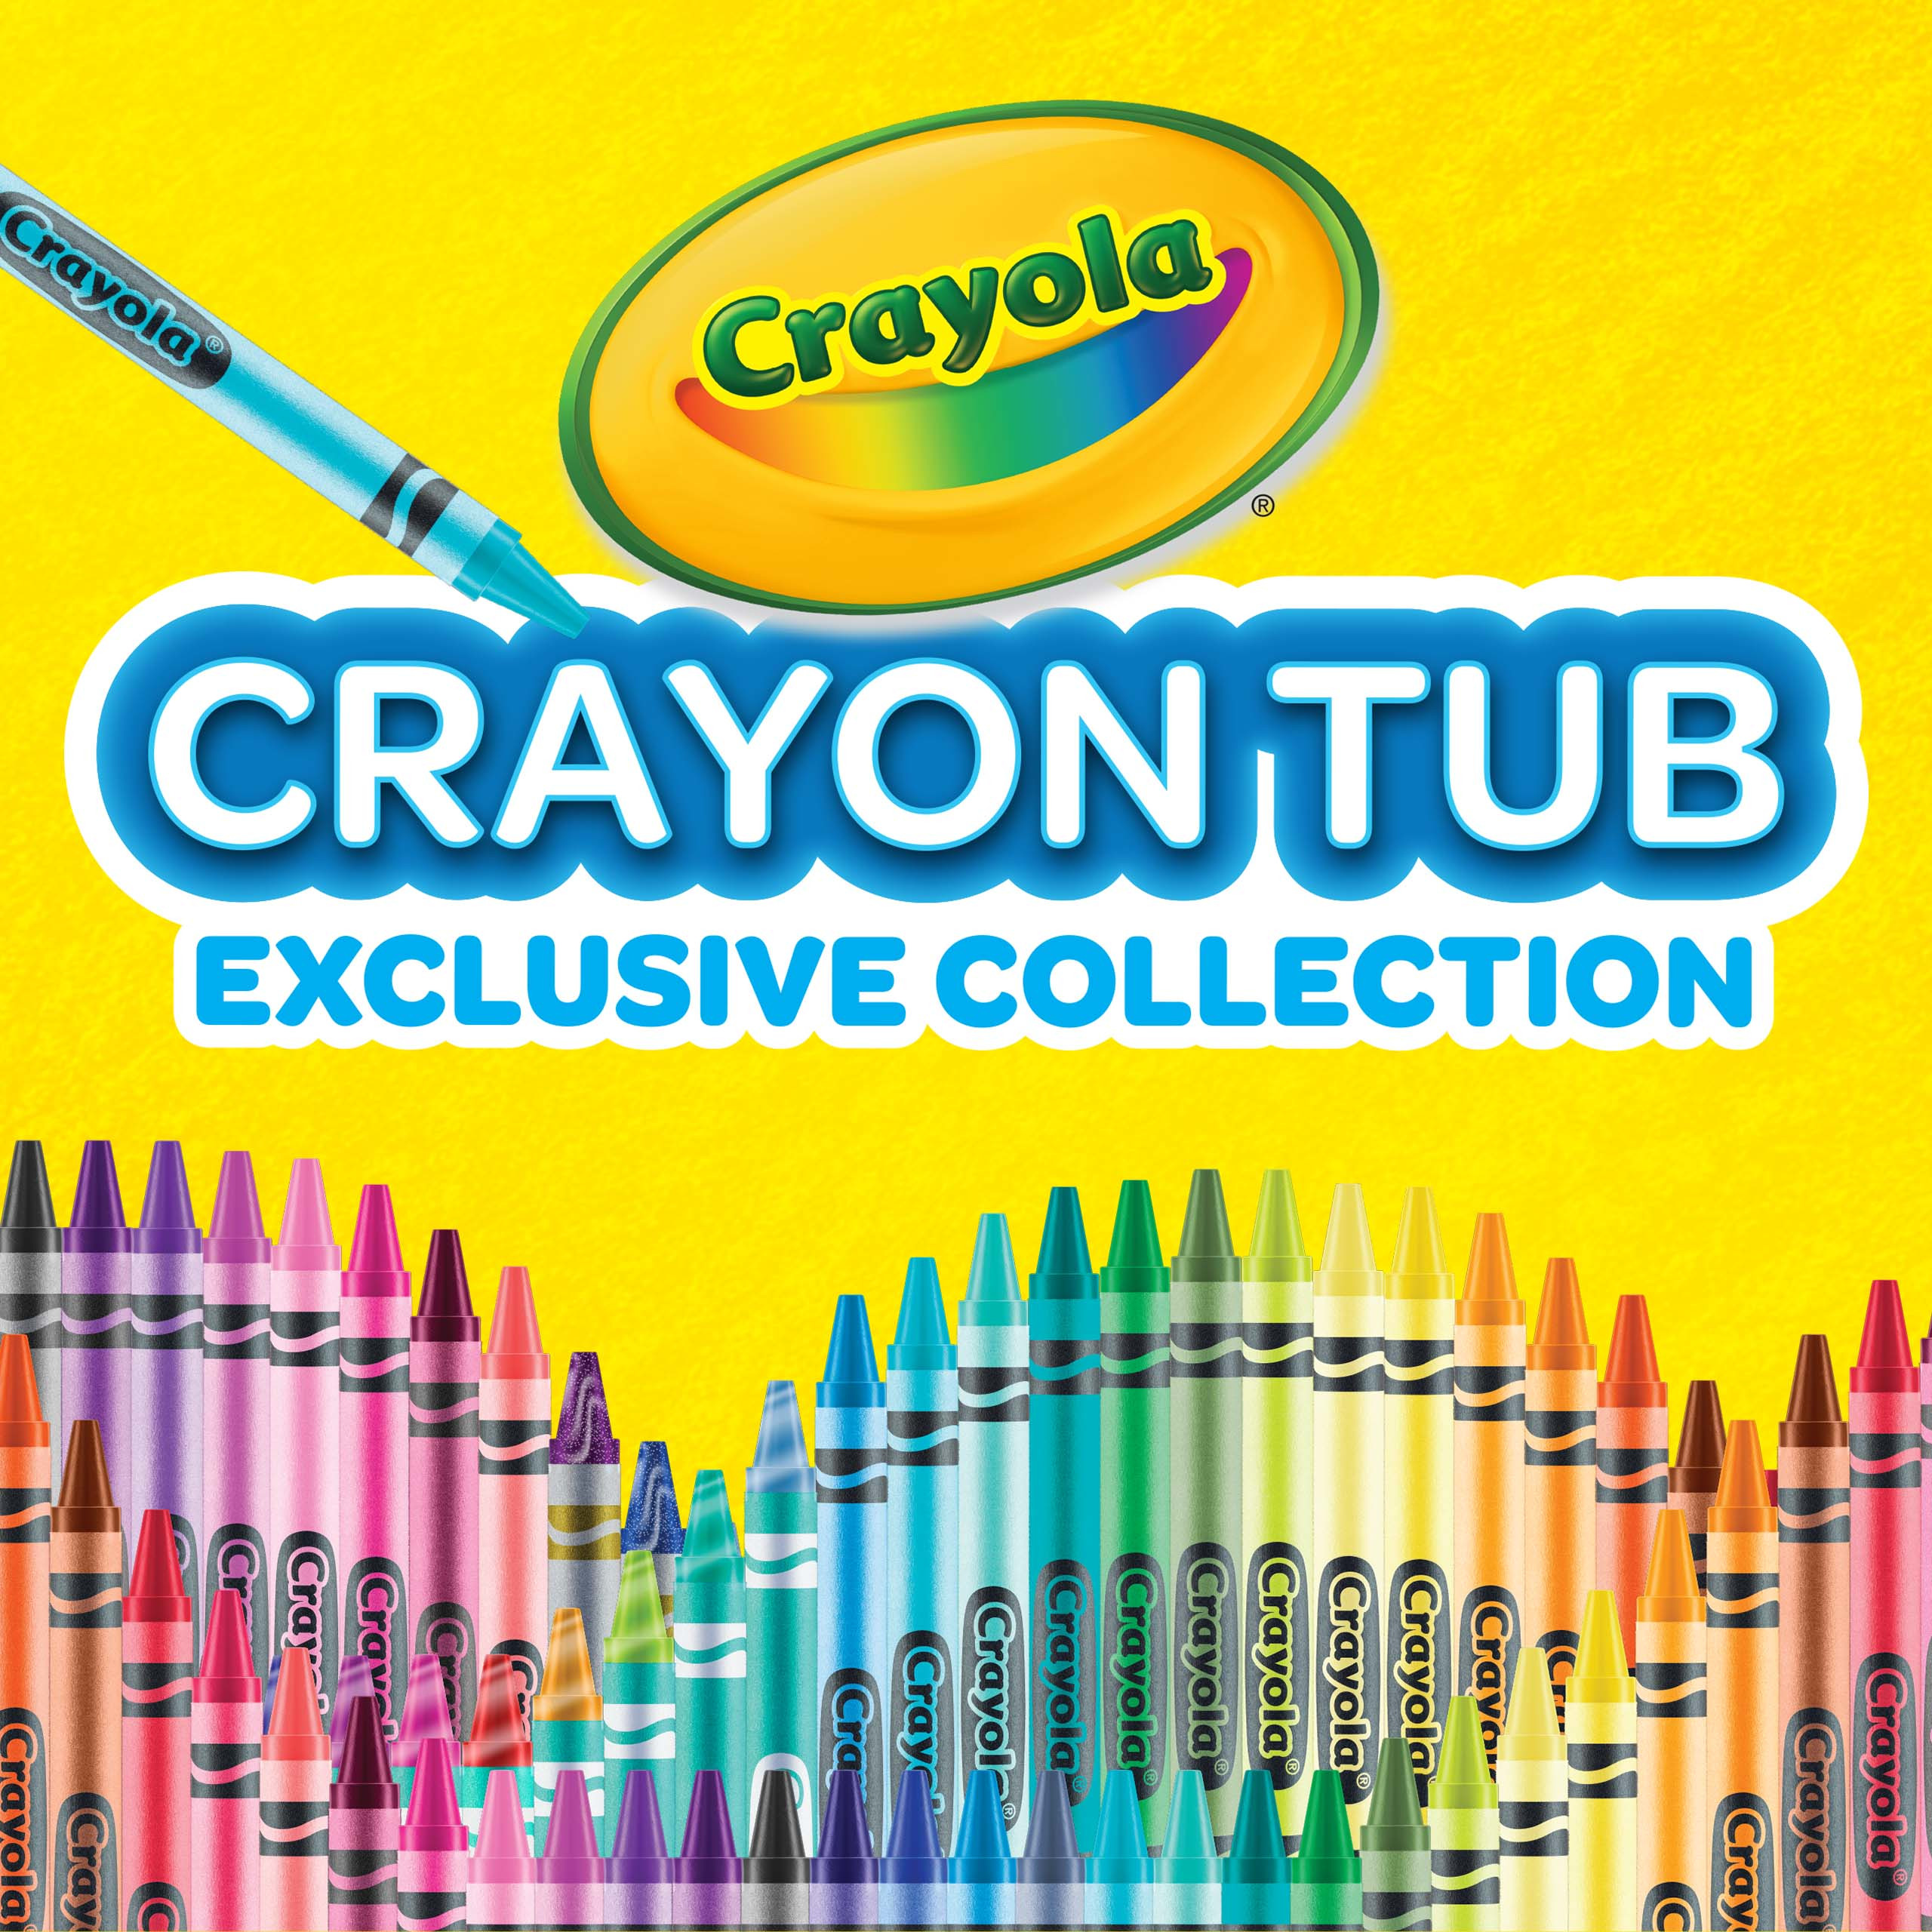 Crayola Crayon & Storage Tub, School Supplies, 168 Ct, with Colors of the World Crayons, Holiday Gift for Kids - image 3 of 9